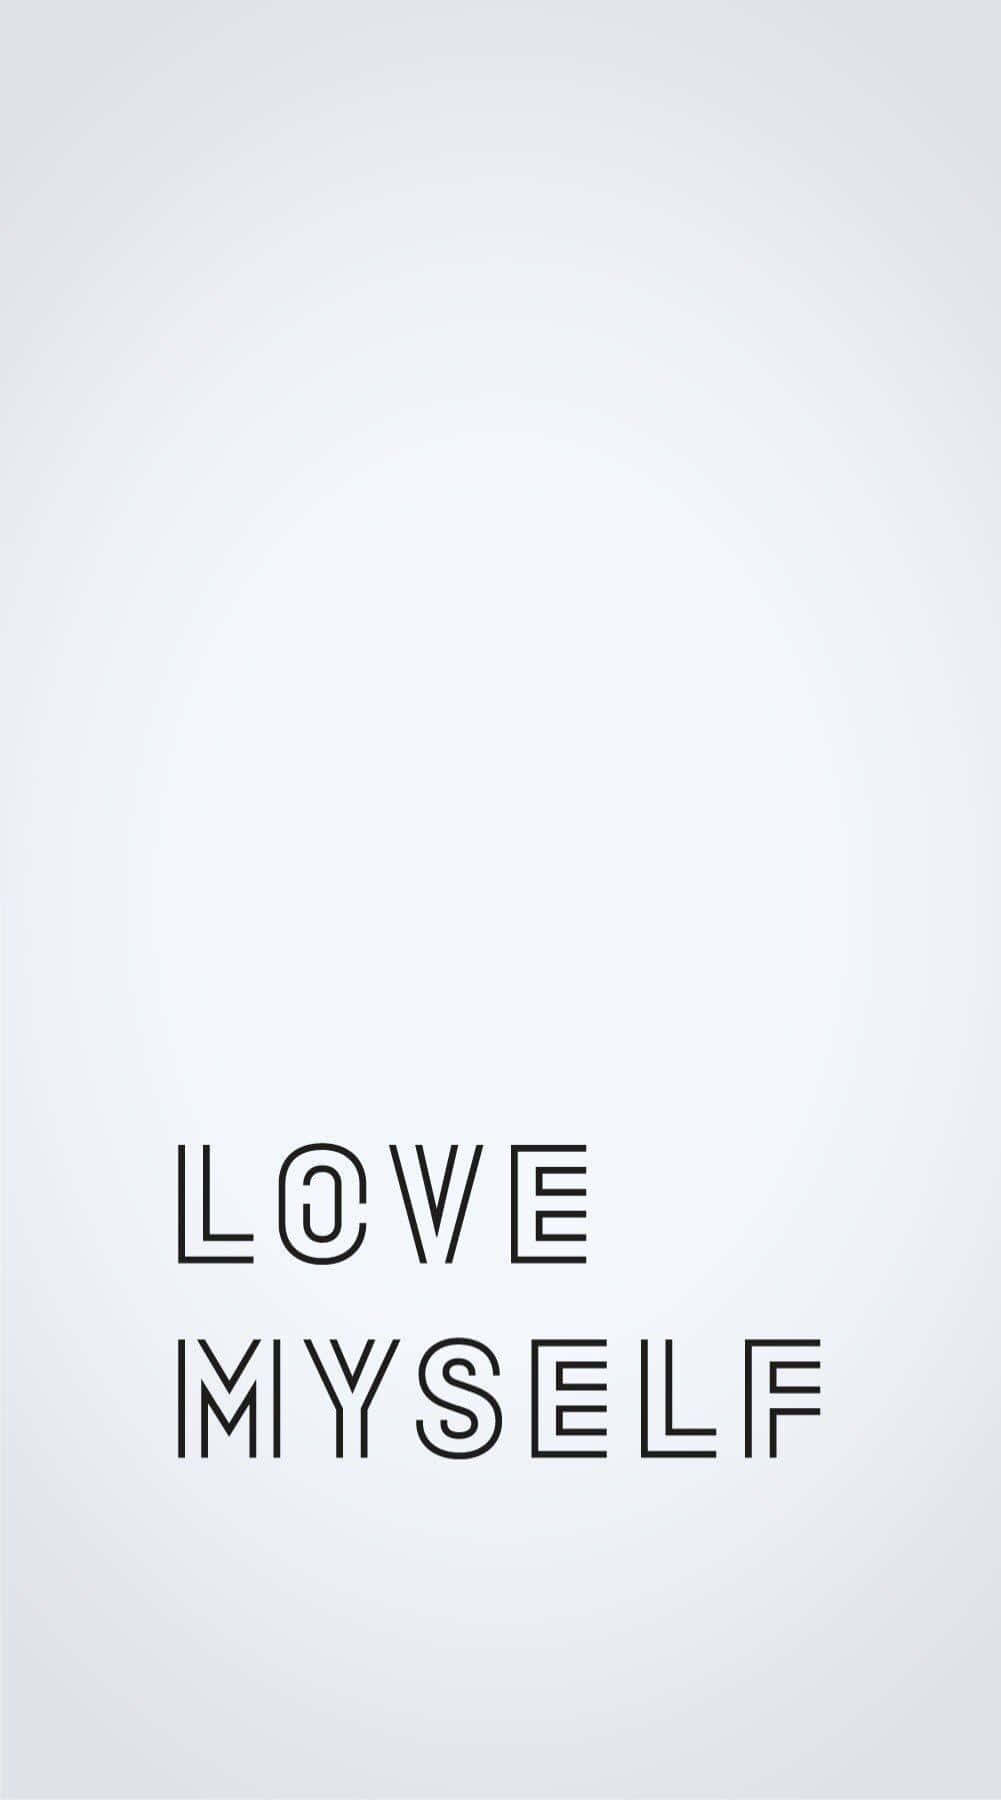 Love yourself and the world around you - be kind and compassionate! Wallpaper